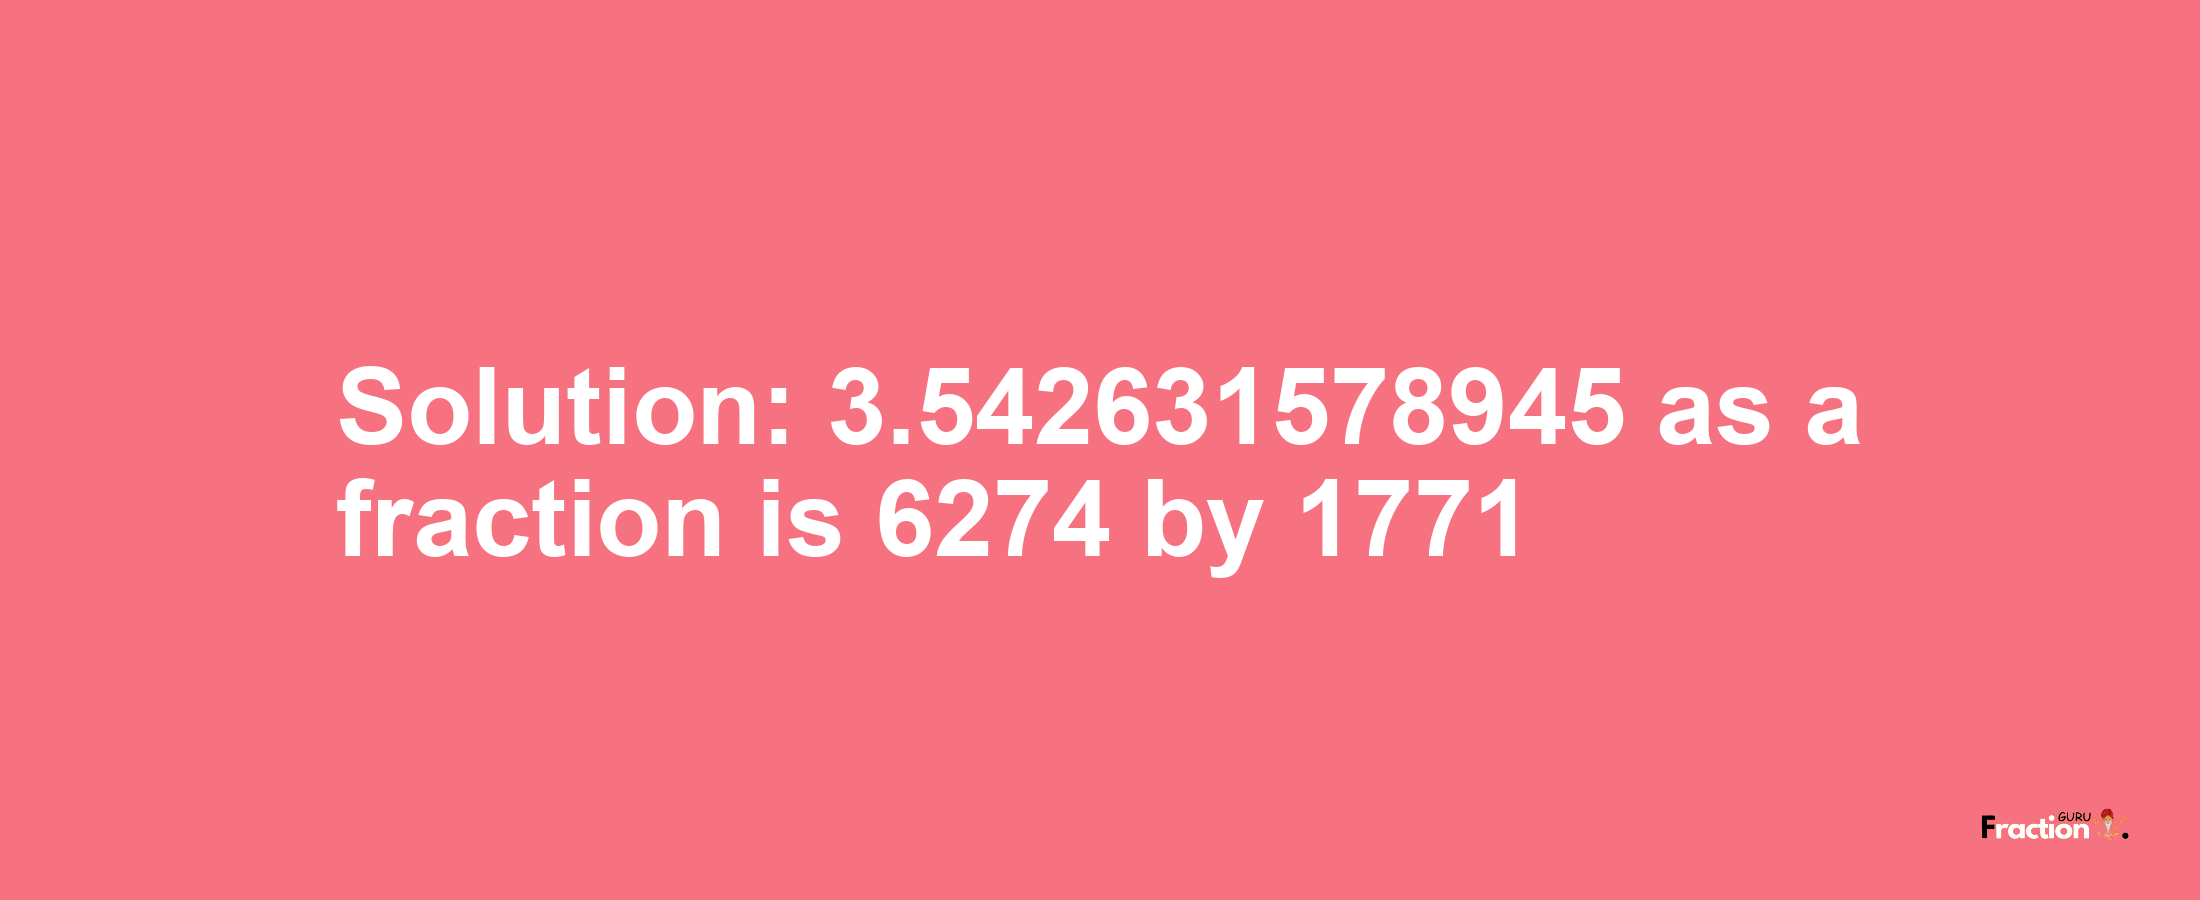 Solution:3.542631578945 as a fraction is 6274/1771